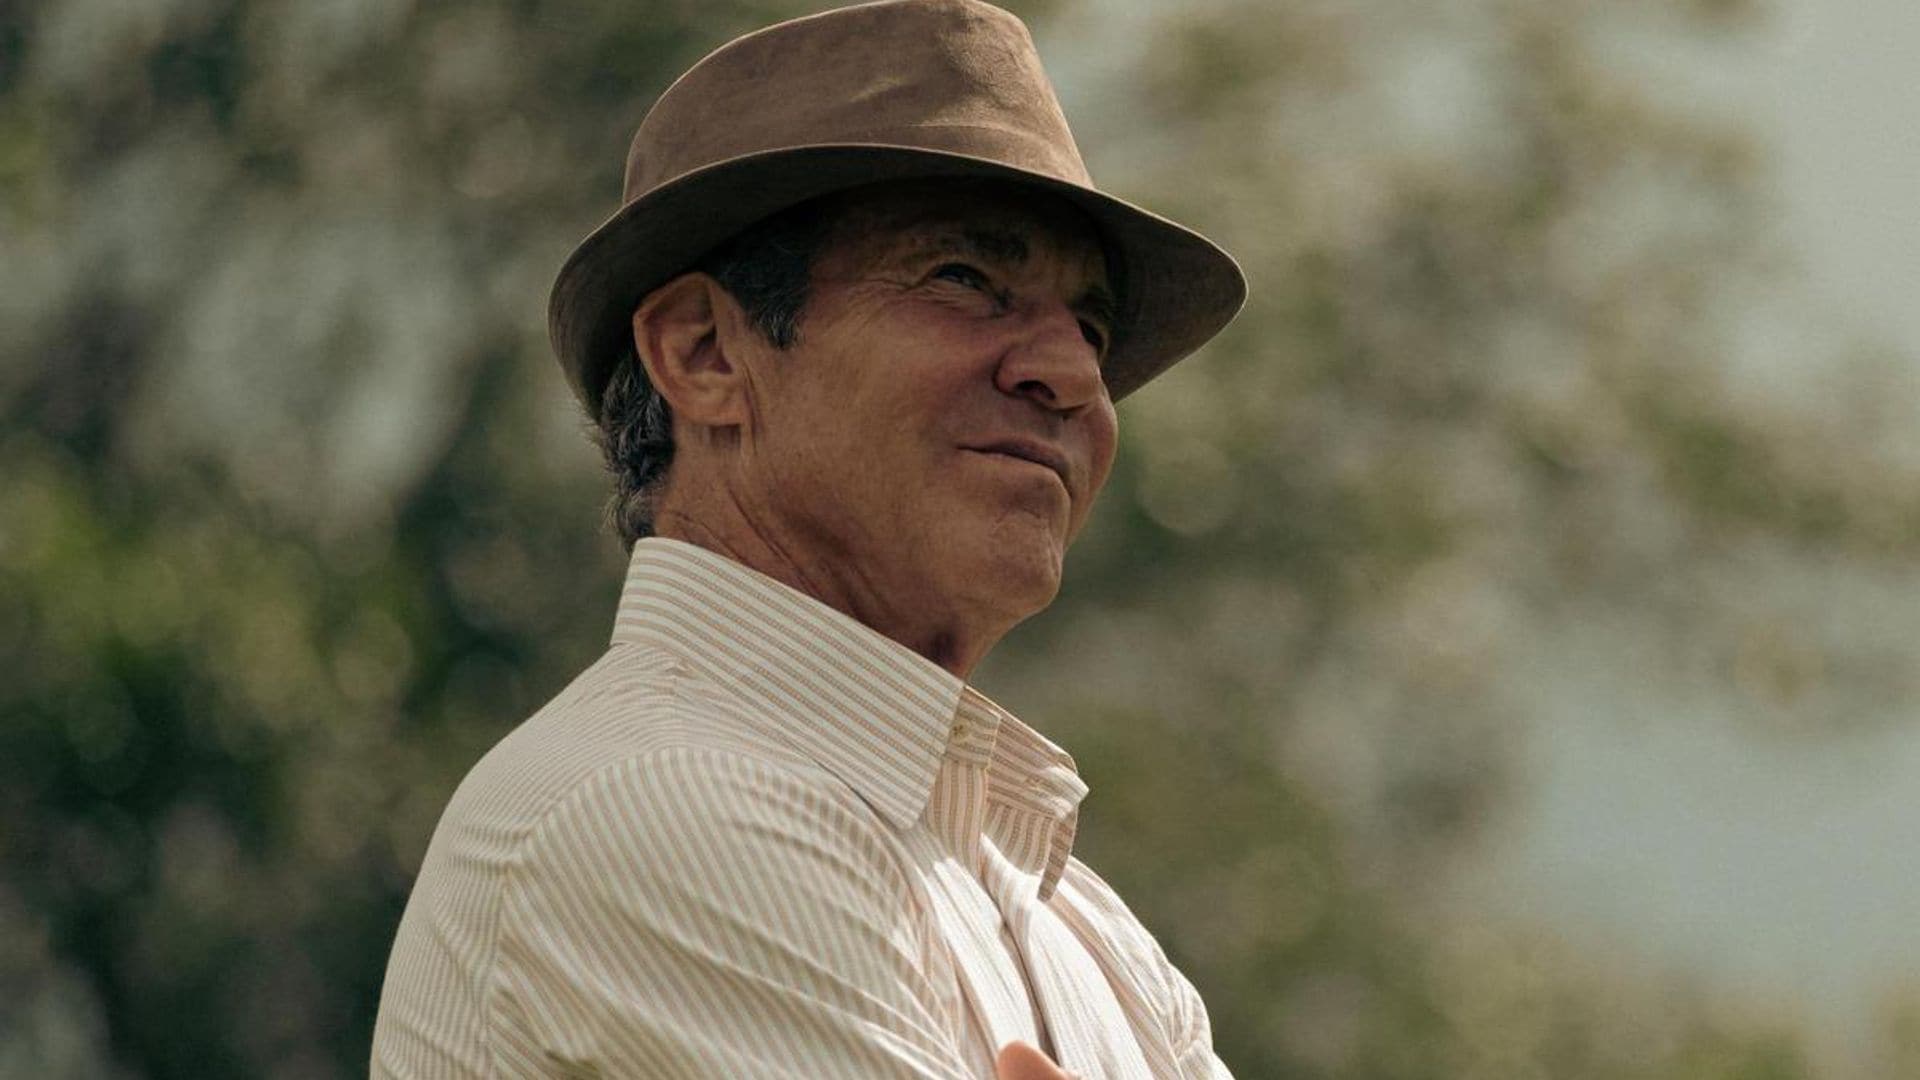 Dennis Quaid reflects on ‘The Long Game’ and growing up amidst segregation